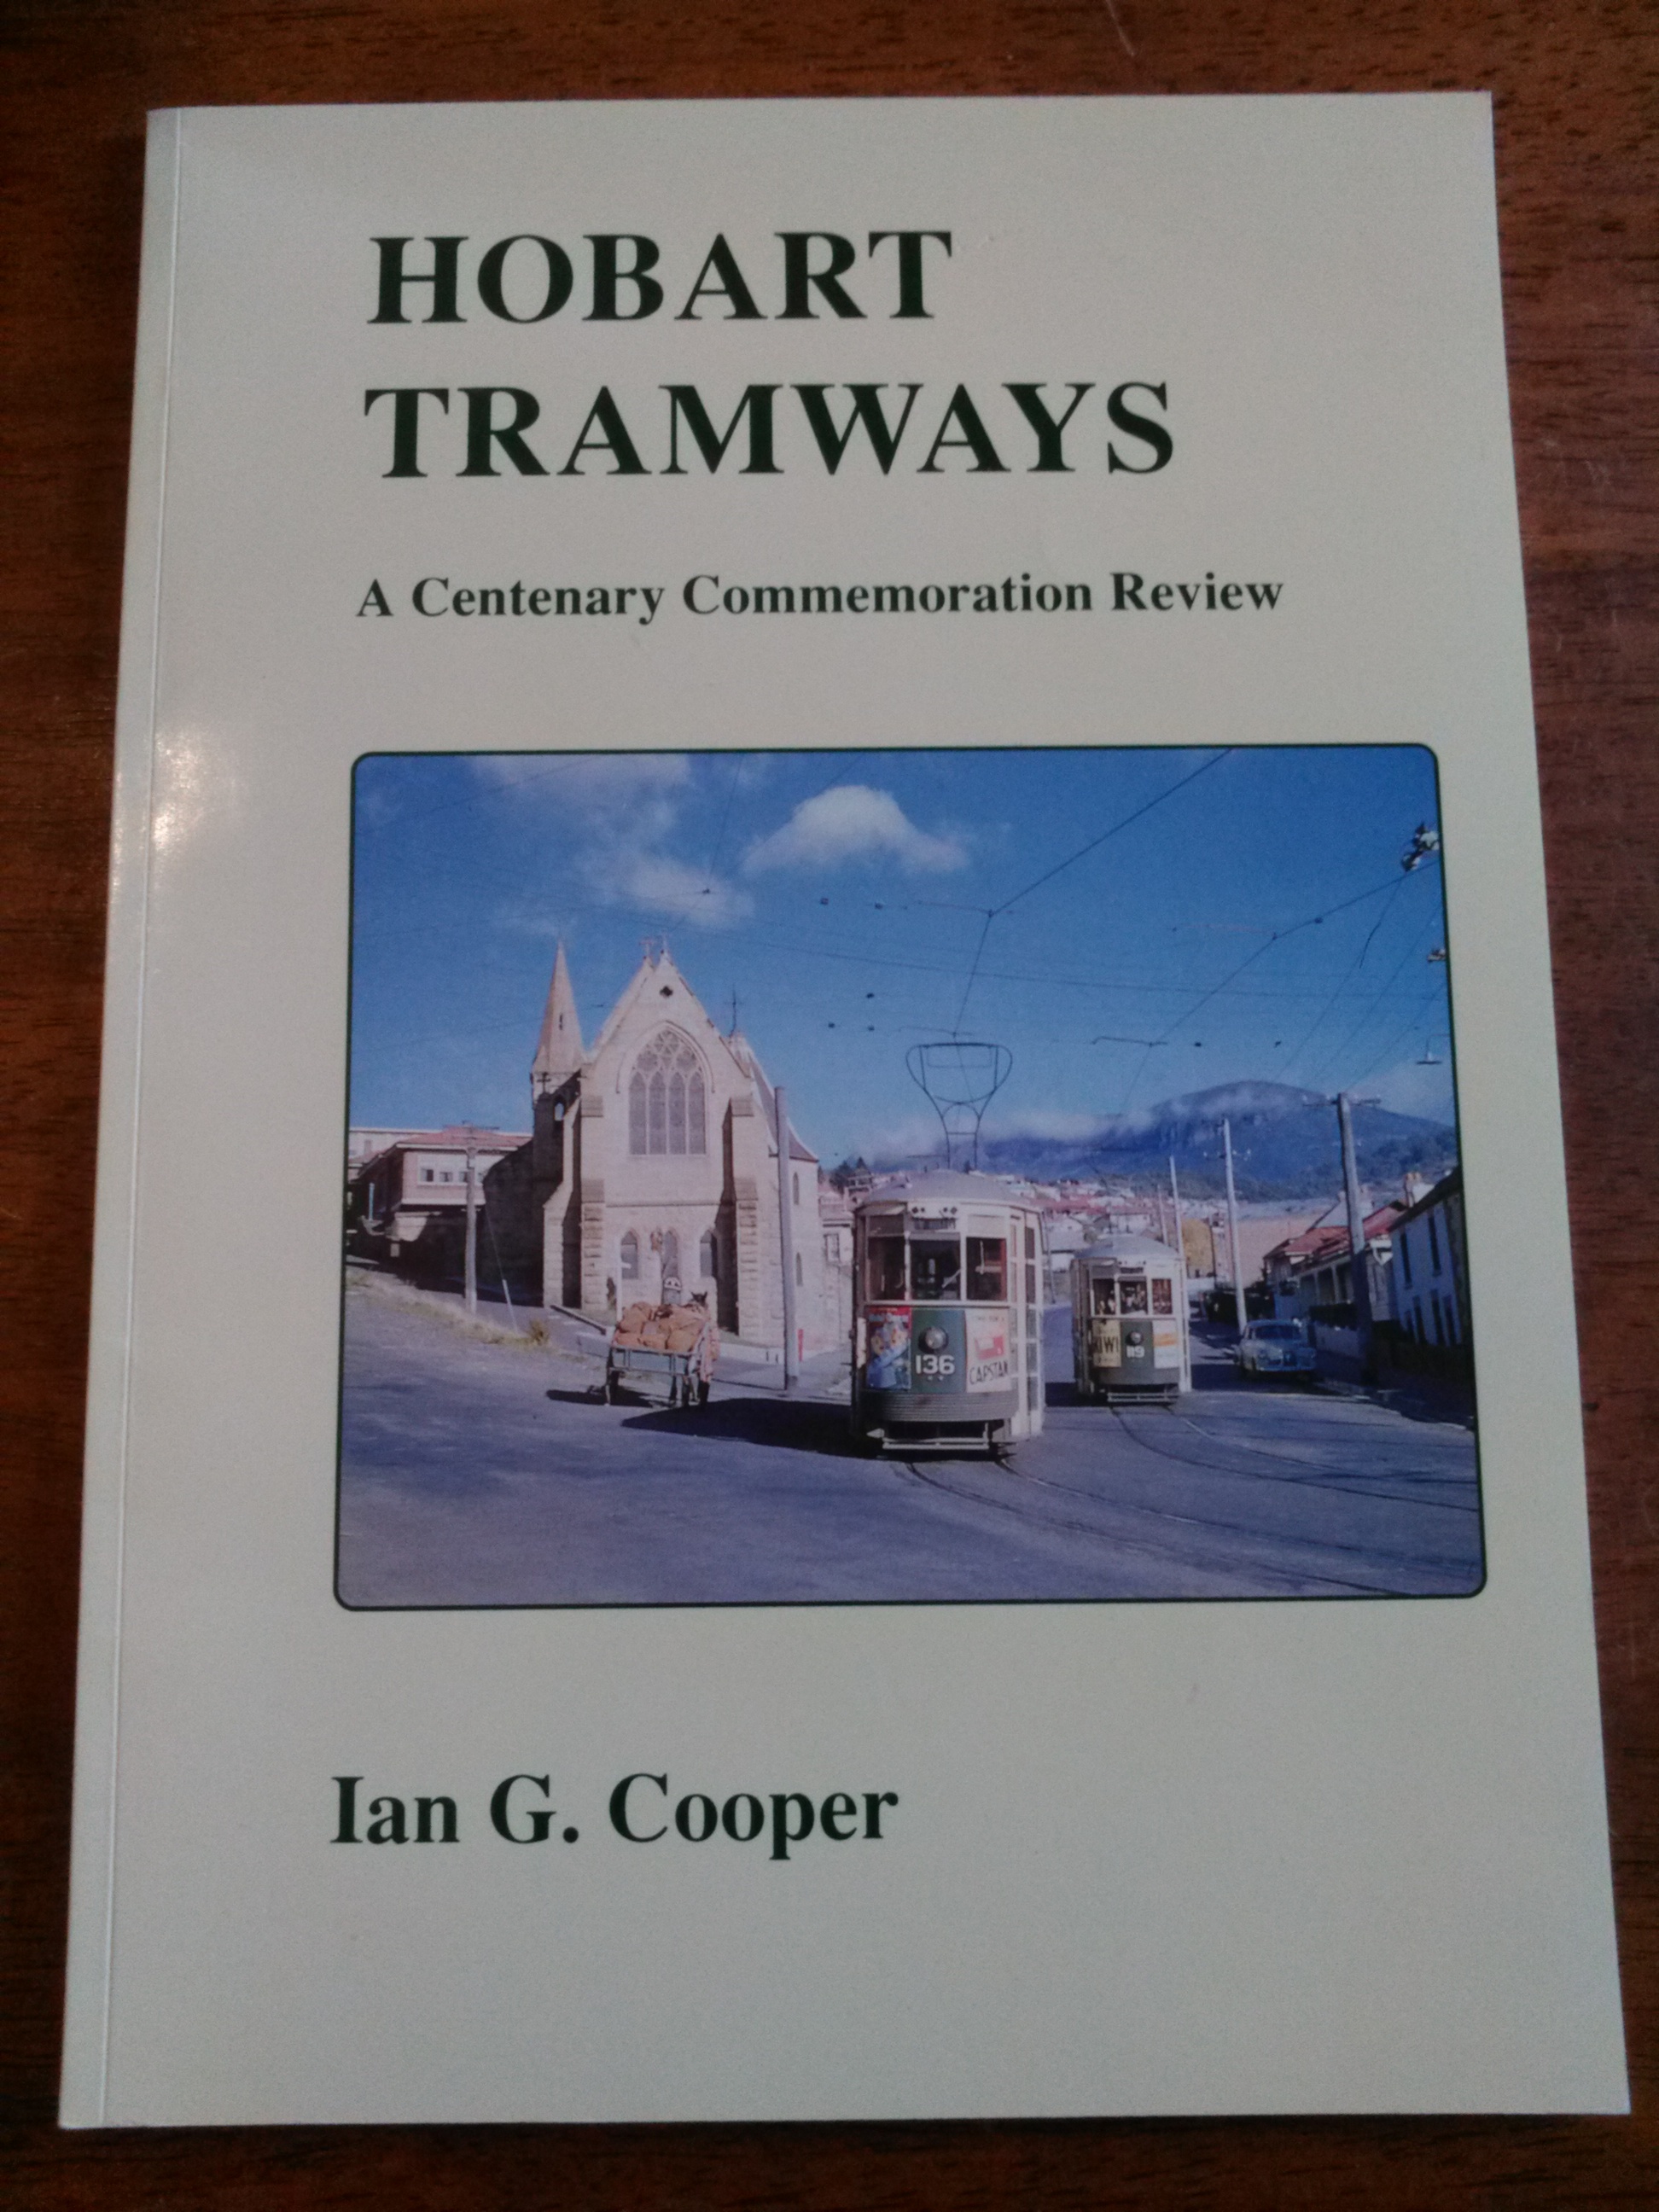 Hobart Tramways - A centenary commemoration review